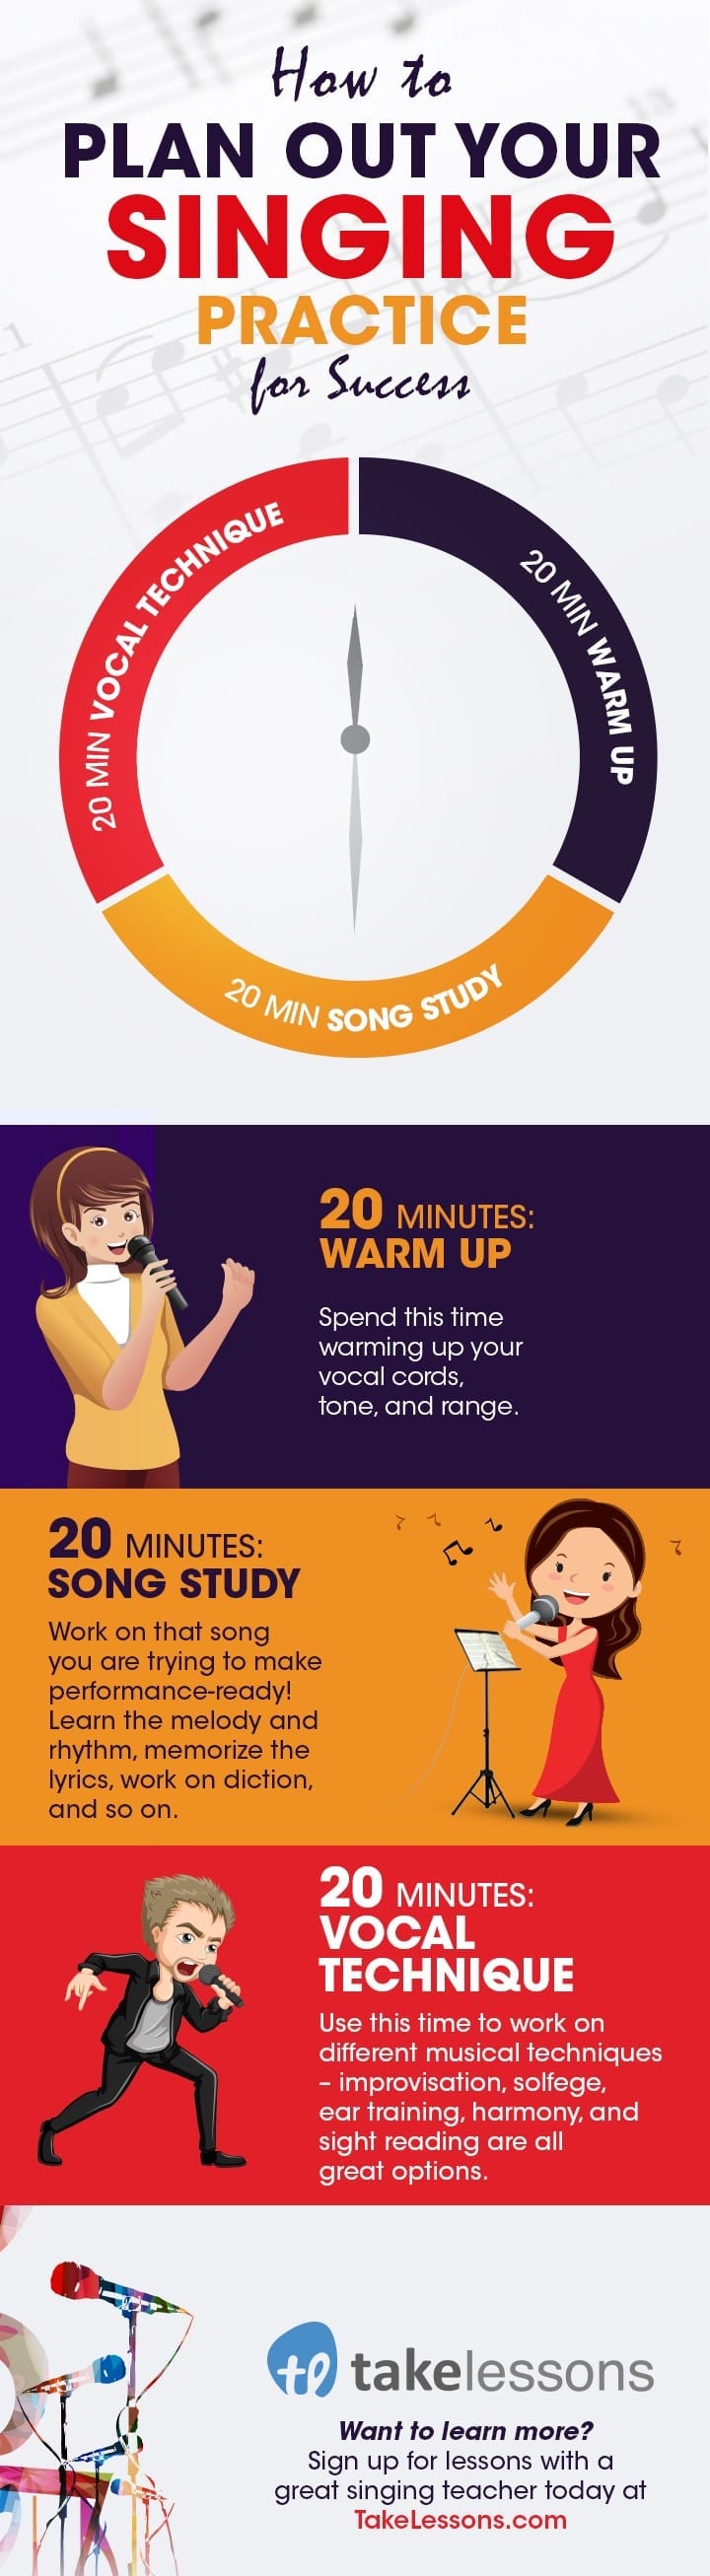 How to Plan Your Singing Practice